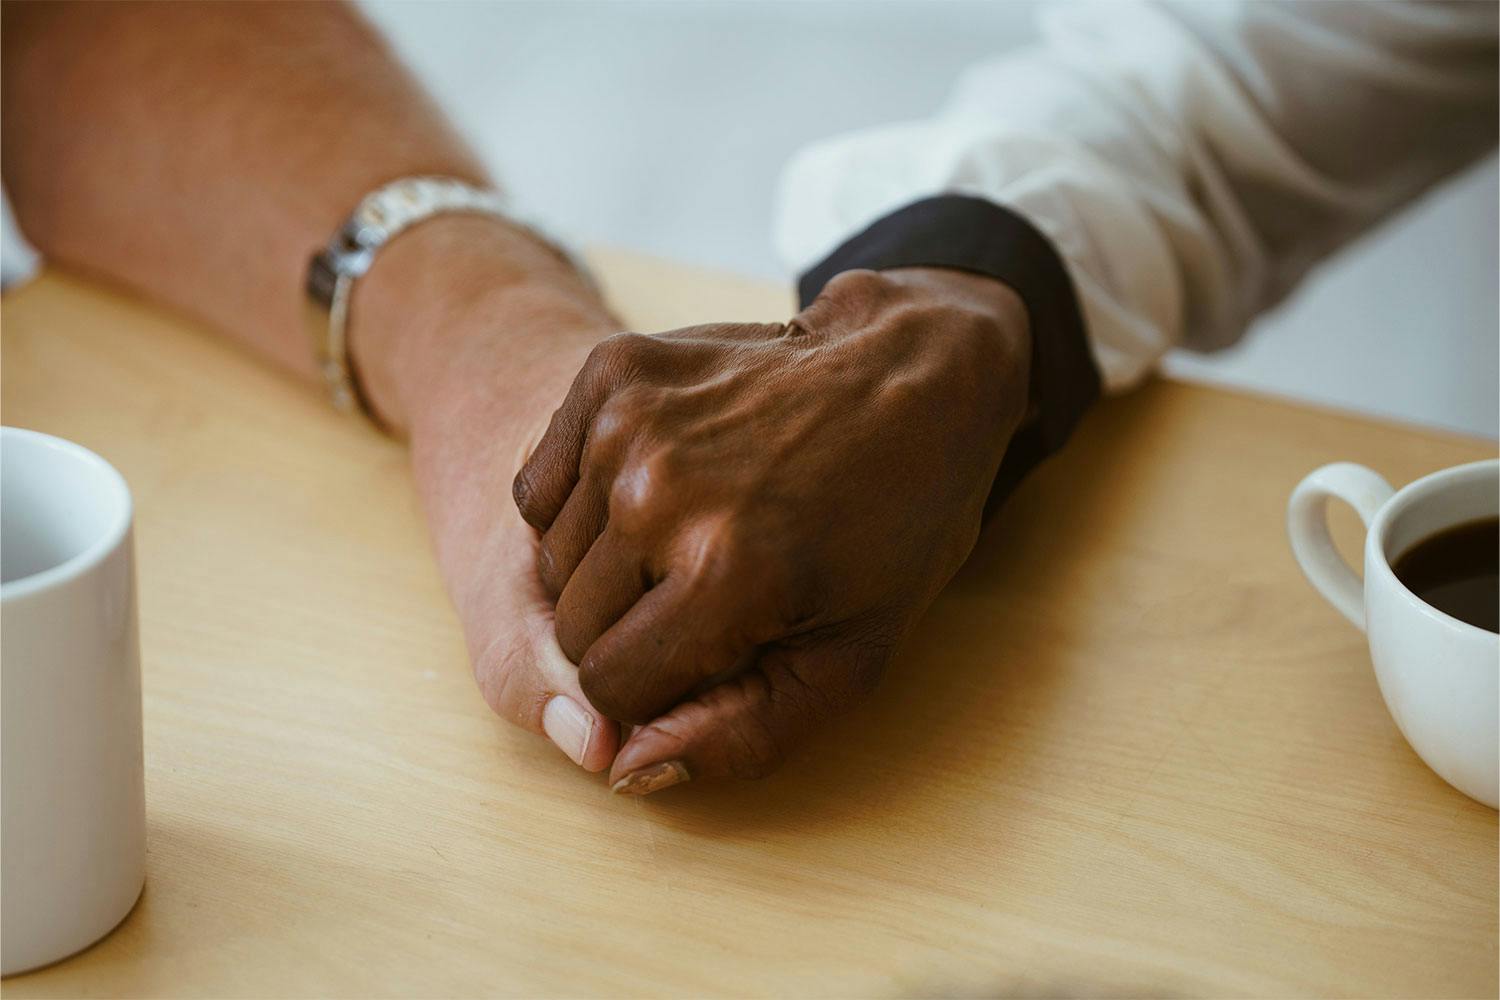 Two people, one light skinned and one dark skinned, holding hands on a wooden table. Next to them are cups of coffee.